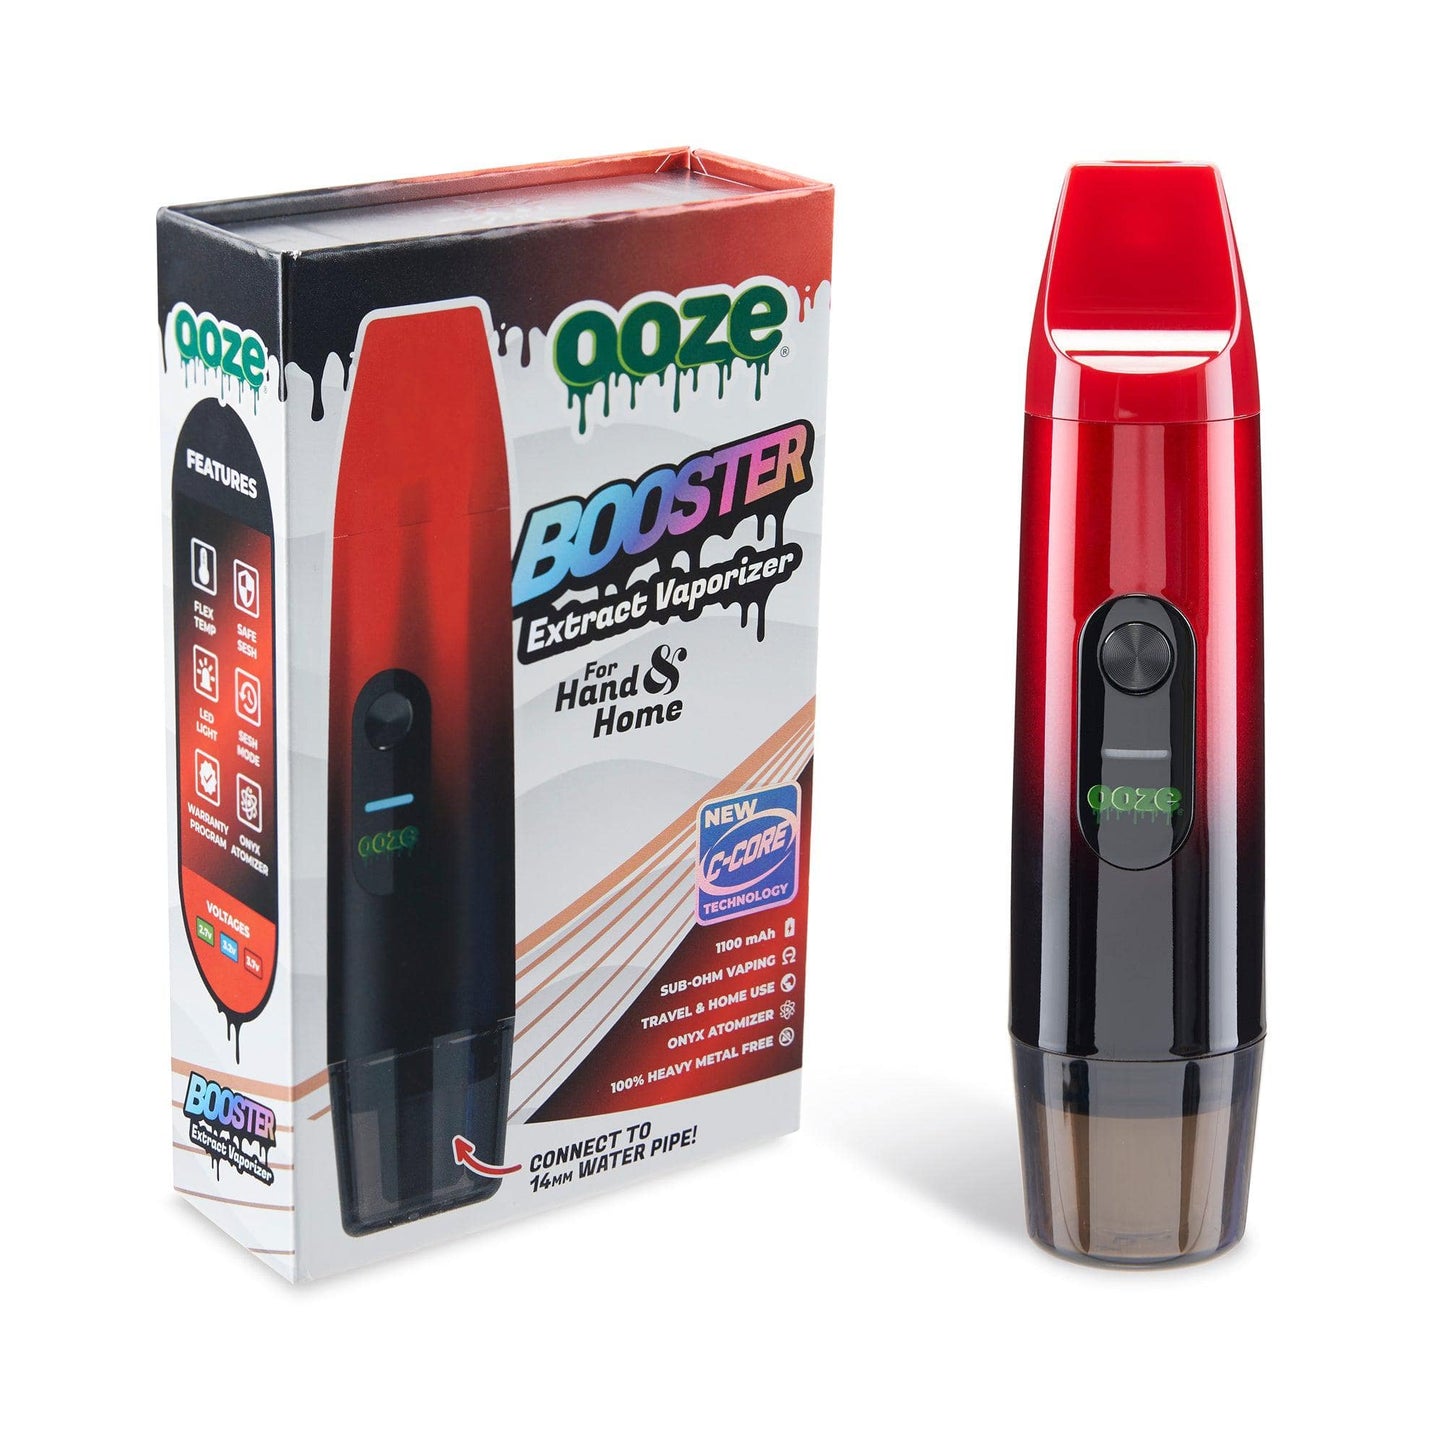 Ooze Batteries and Vapes Midnight Sun Ooze Booster Extract Vaporizer – C-Core 1100 mAh